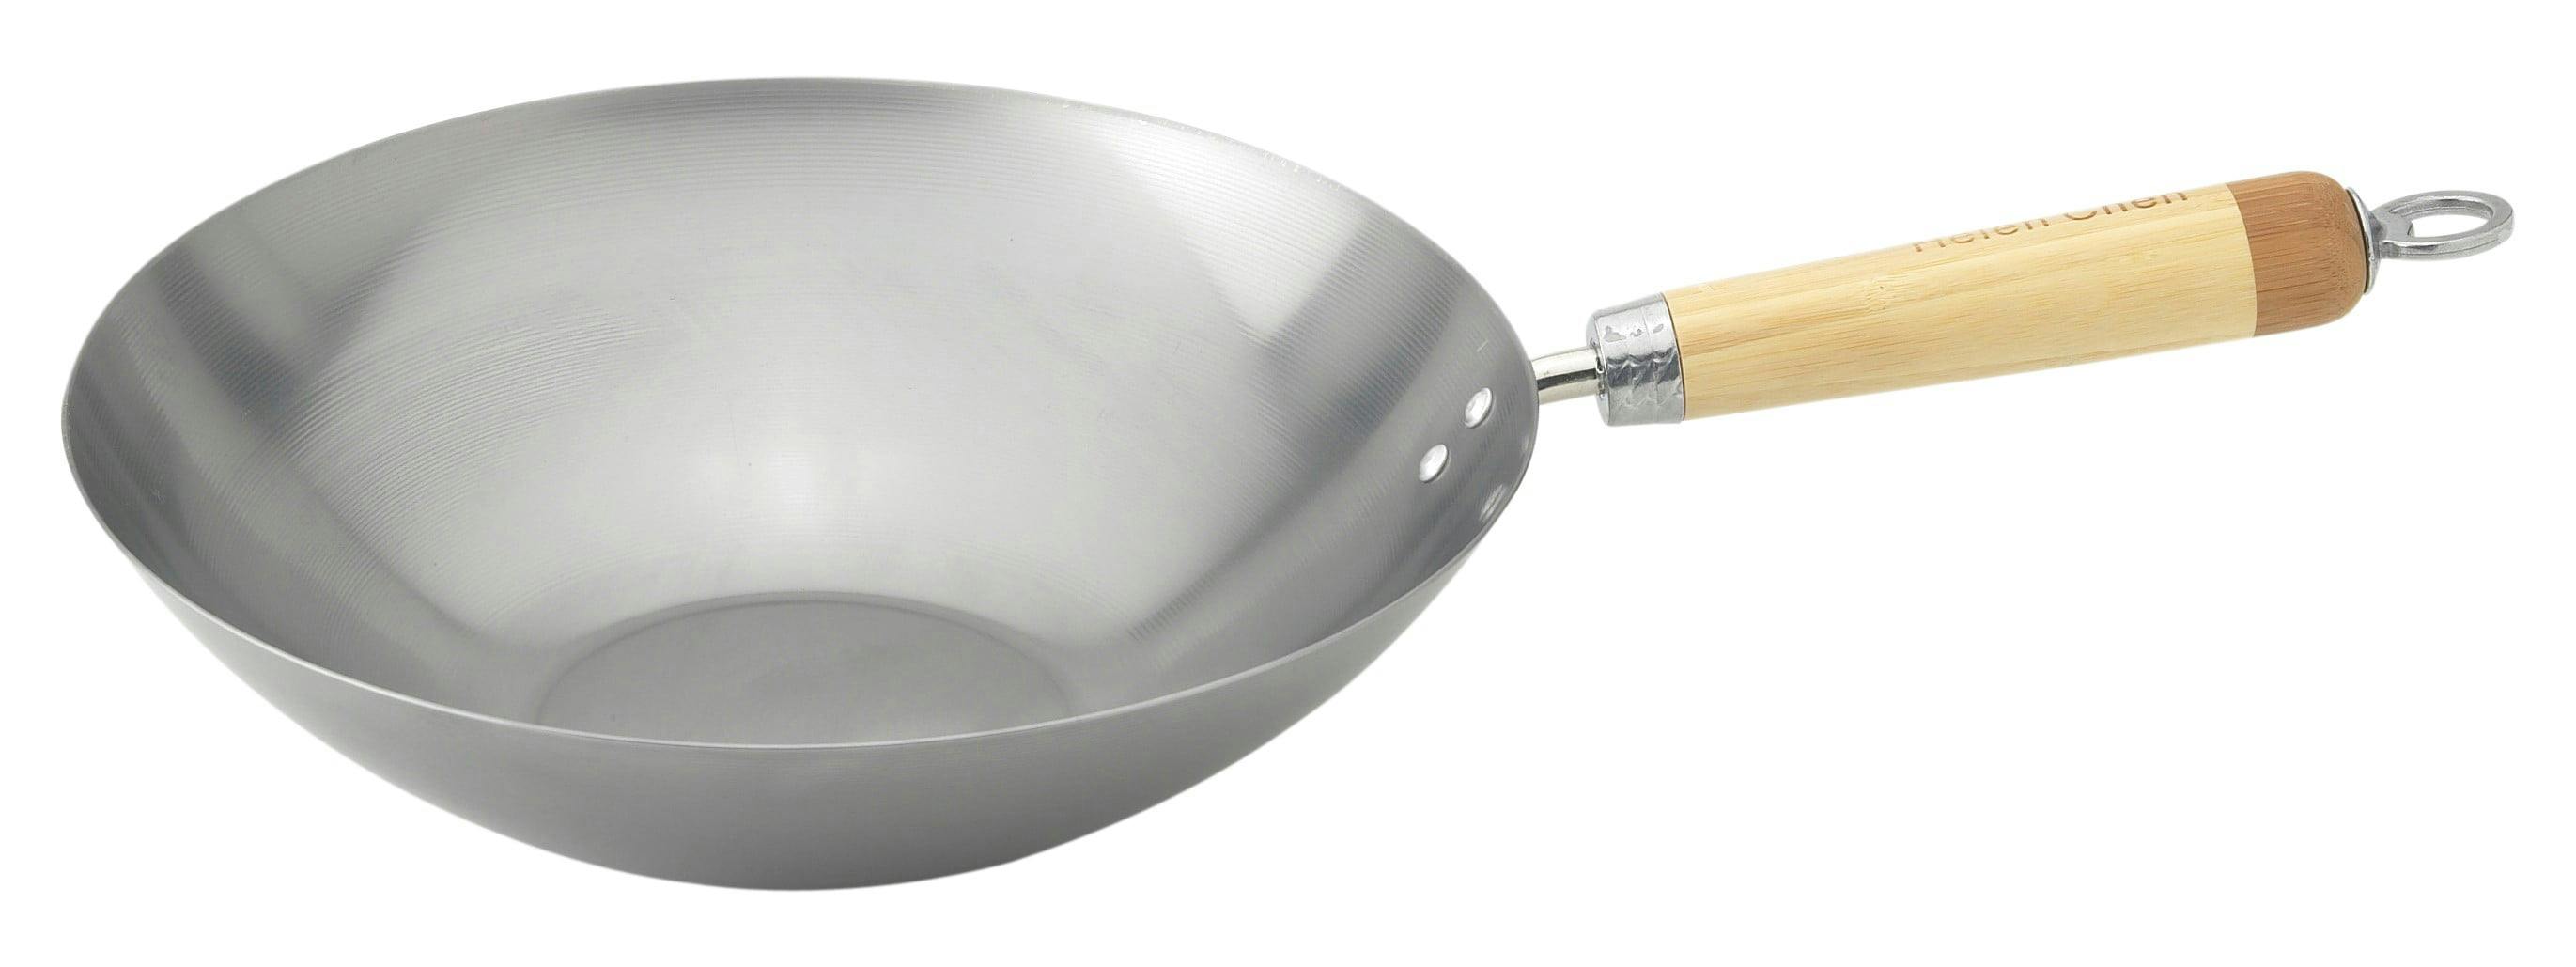 Induction-Ready 12" Stir Fry Pan with Heat-Resistant Bamboo Handle